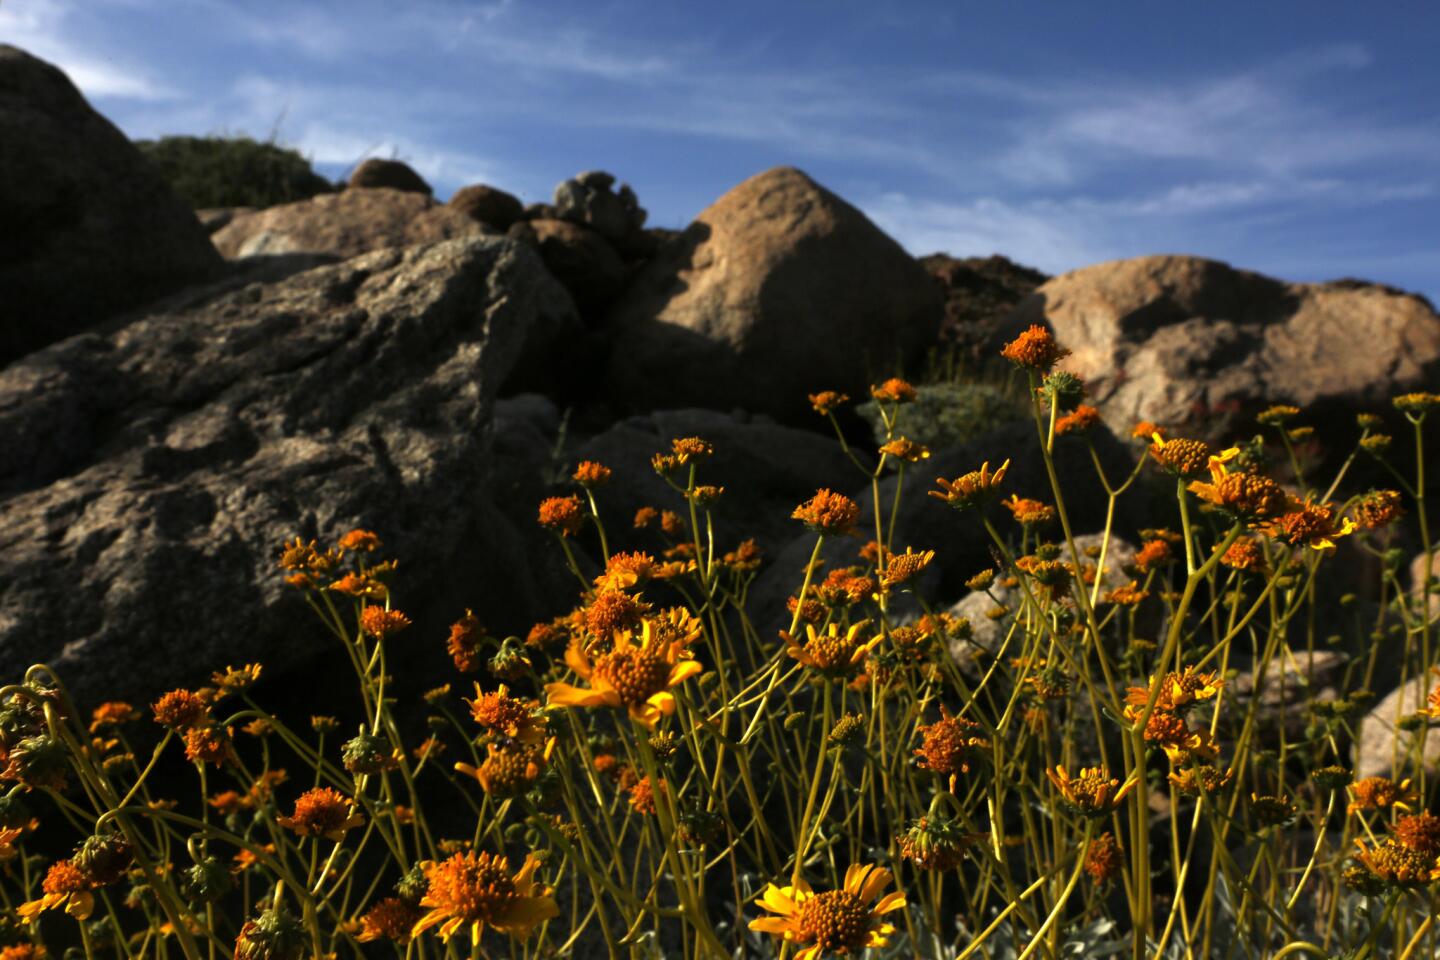 Colorful brittle bush blooms reach for the sky at Anza-Borrego Desert State Park. Whether there is a "super bloom" or just a sprinkling of flowers, a small, dedicated group of botanists and flower enthusiasts treks through the park searching for flowers and reporting its findings.